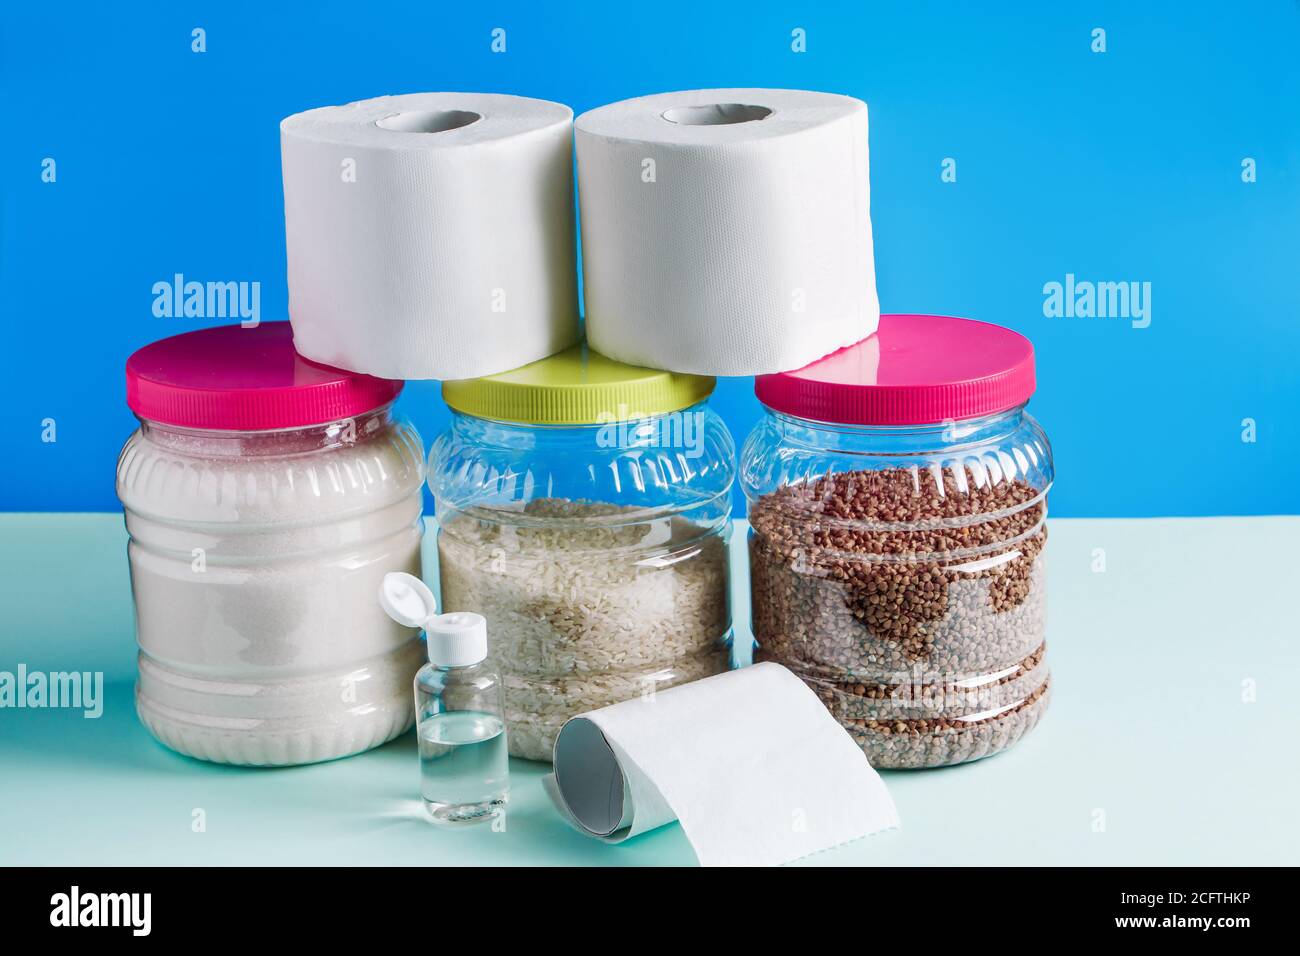 Concept panic buying food at a quarantine - toilet paper, food, antiseptic on a blue background. The coronavirus epidemic in the world. Stock Photo